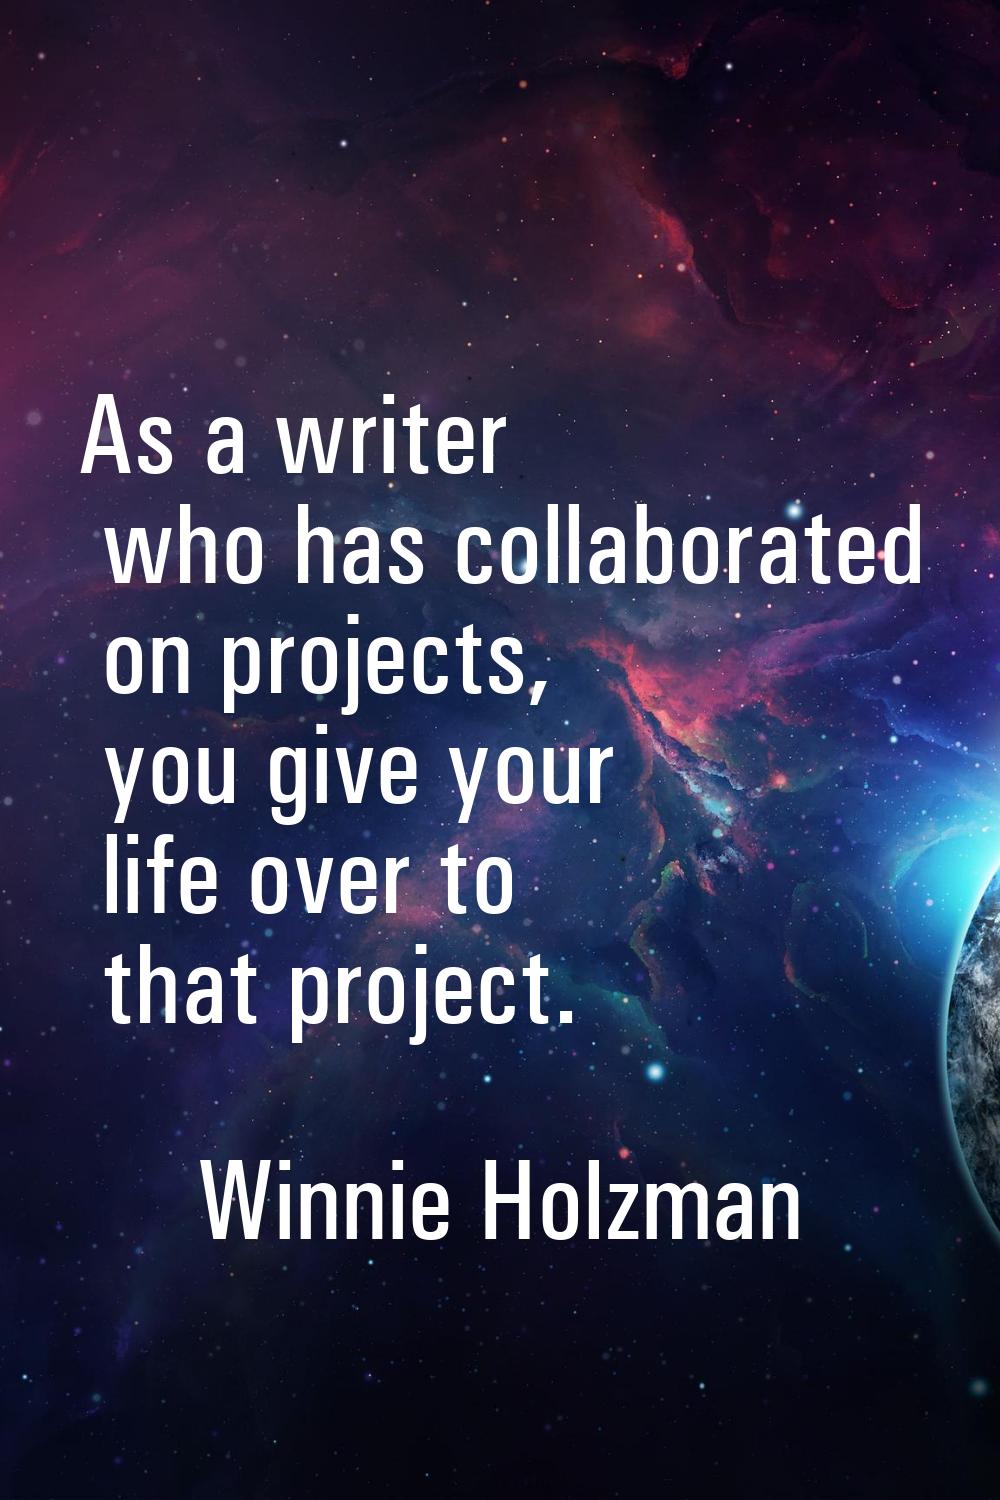 As a writer who has collaborated on projects, you give your life over to that project.